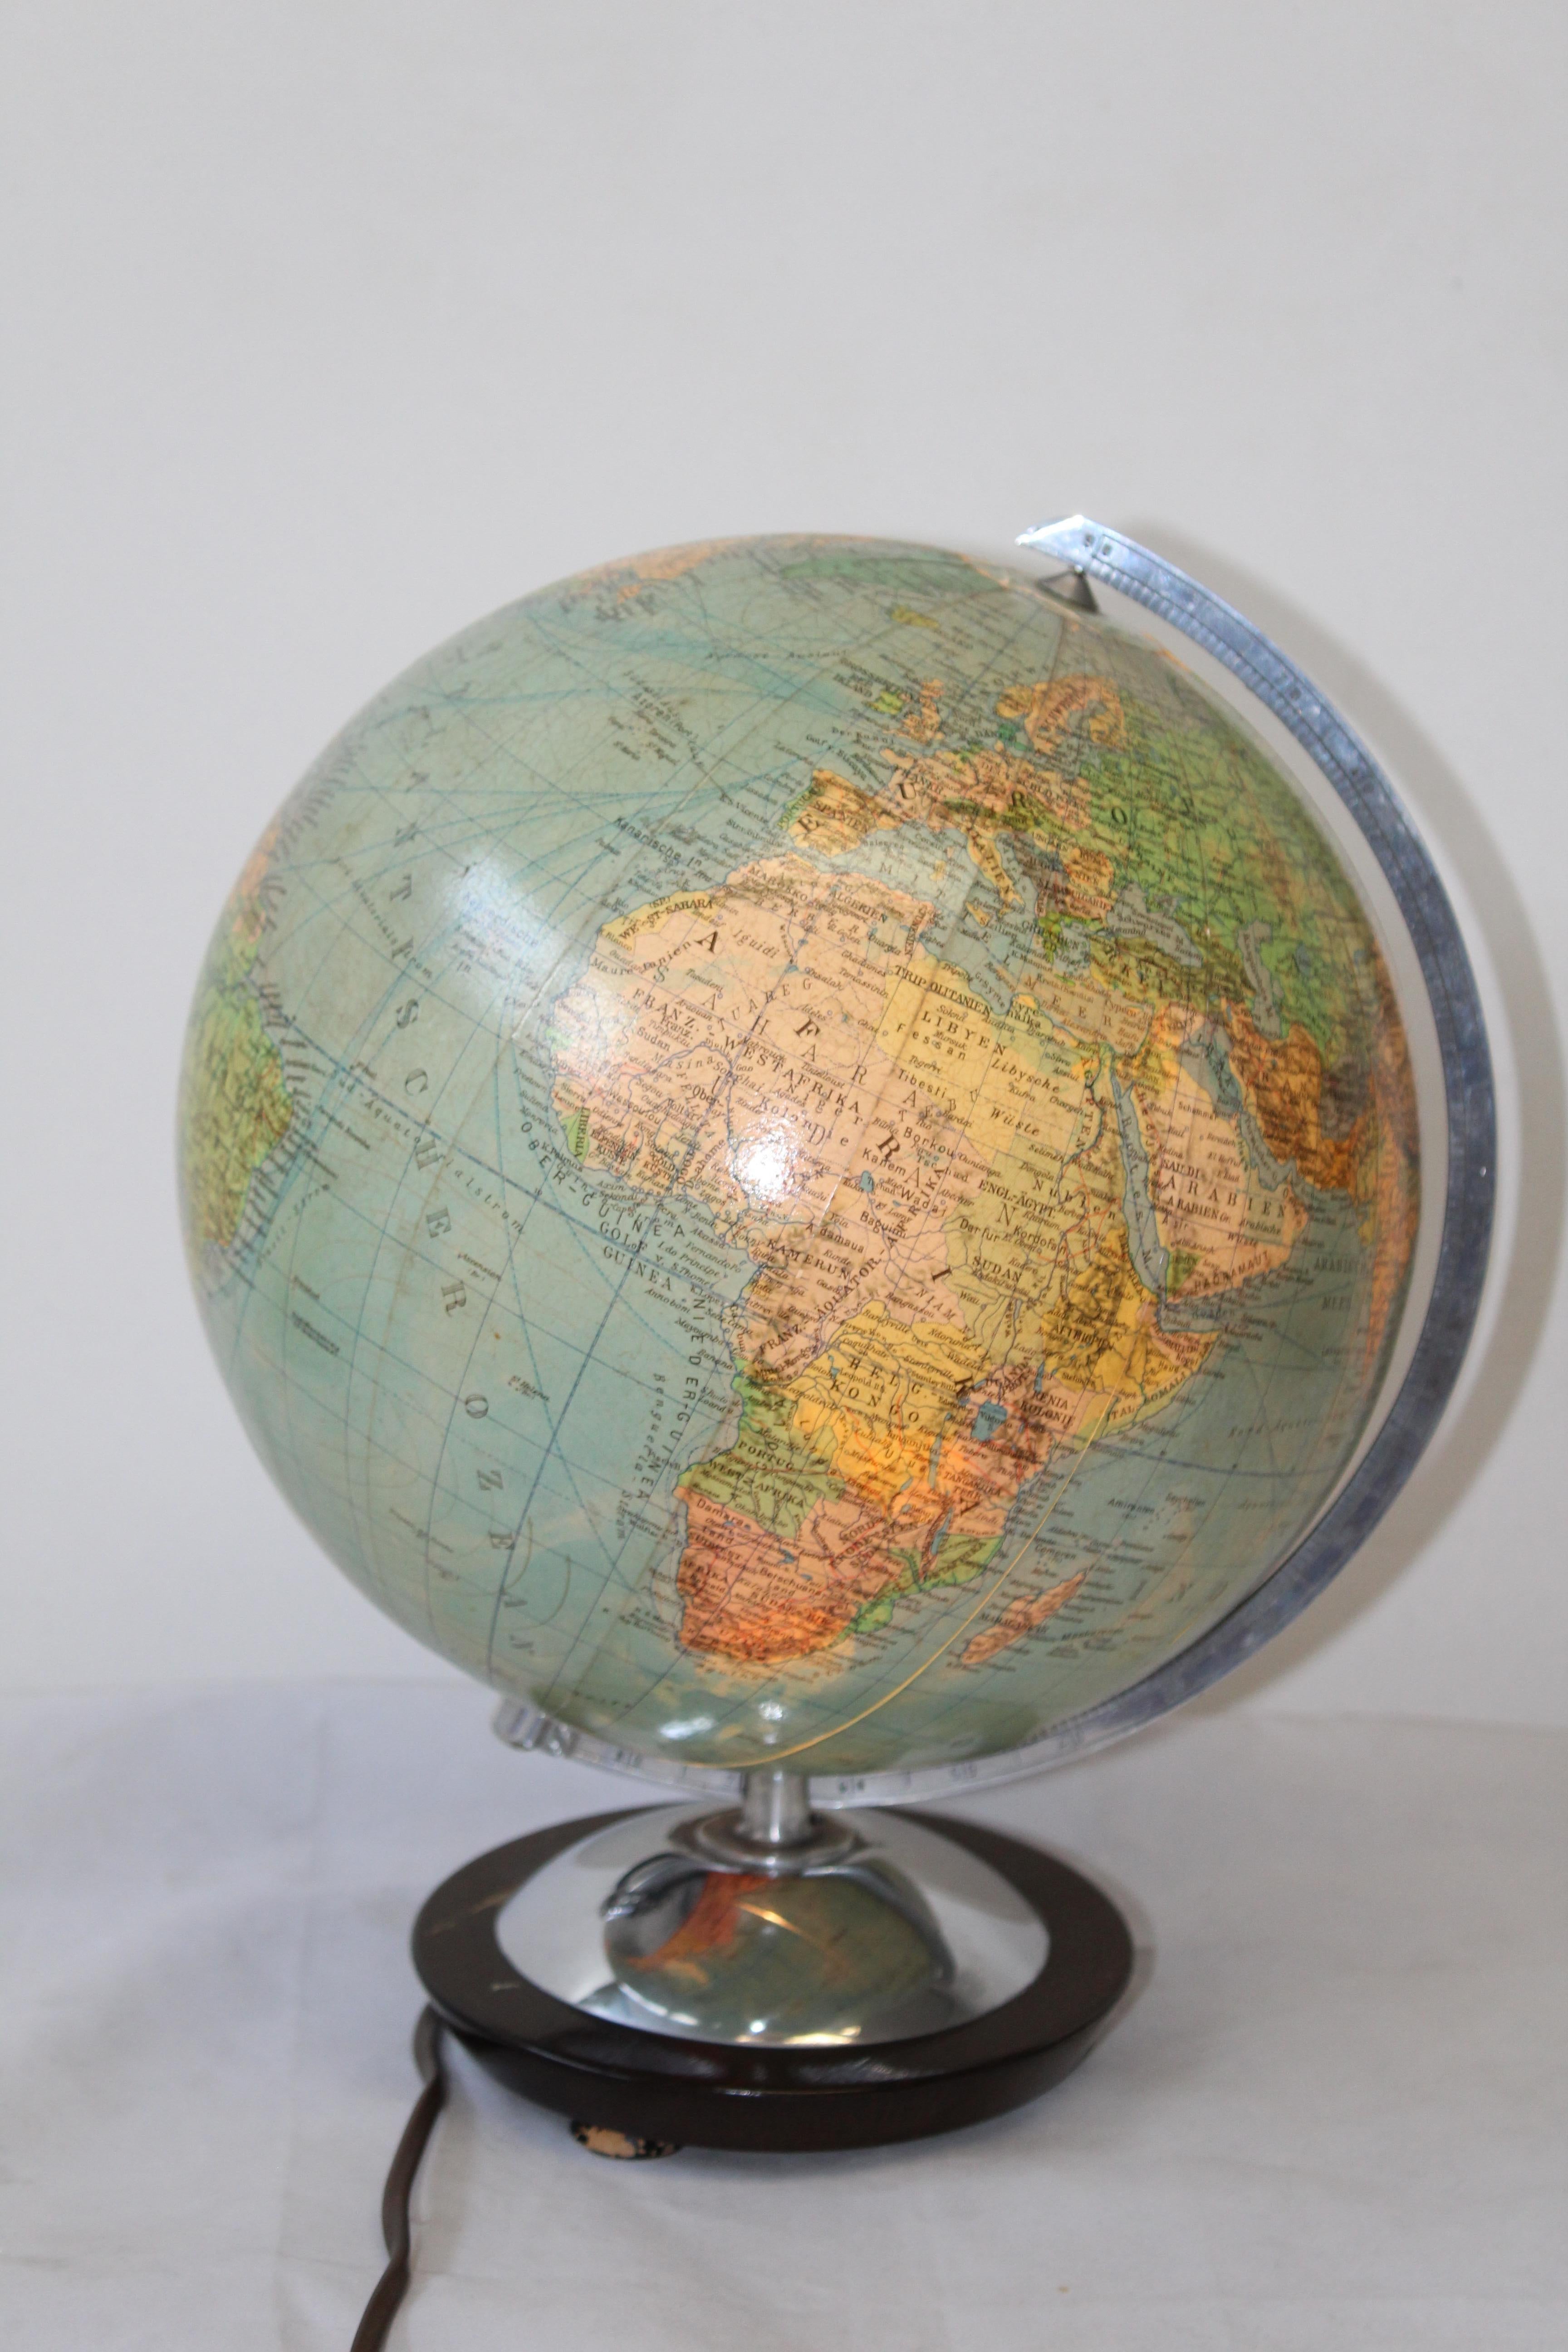 Midcentury glass globe with light from Columbus DuoErdglobe, Germany.

This beautiful vintage Globe has a chrome base.

This globe comes from the 60s and is made in Germany.

Made by Verlag and design by Paul Oestergaard.

The globe is